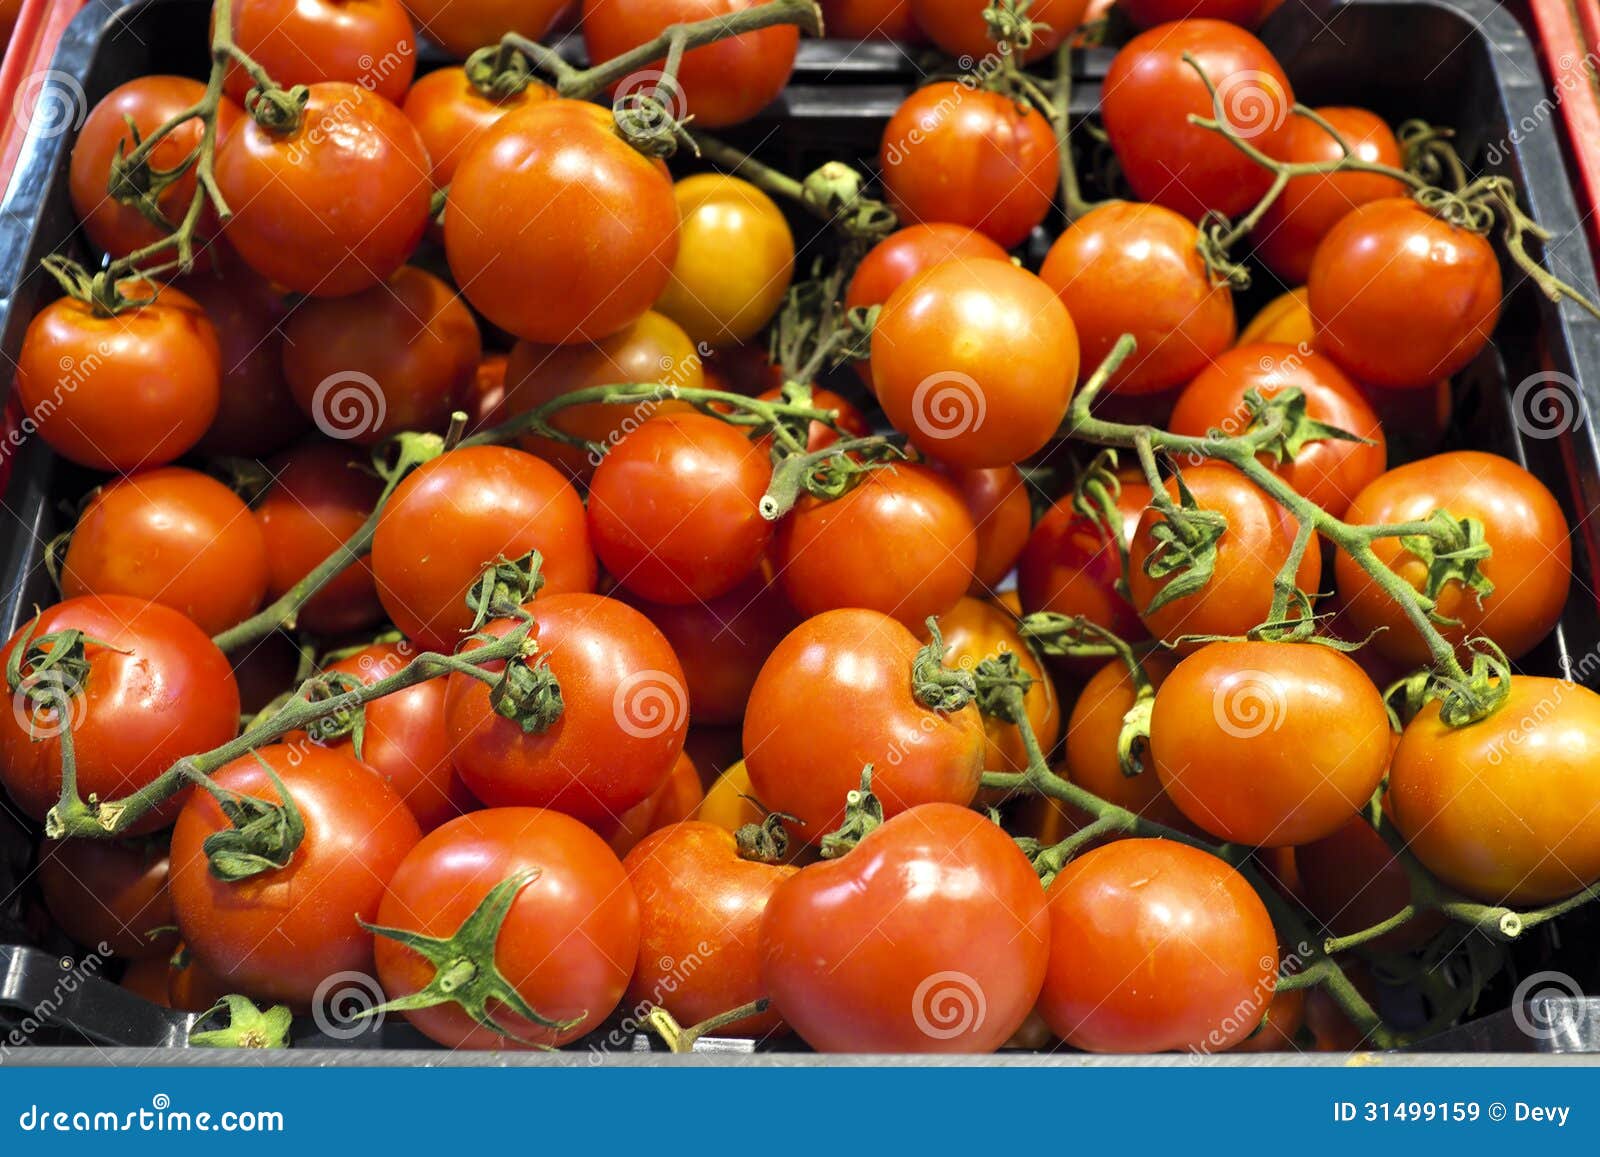 0rganic Tomatoes in a Market Stall Stock Image - Image of vegetarian ...